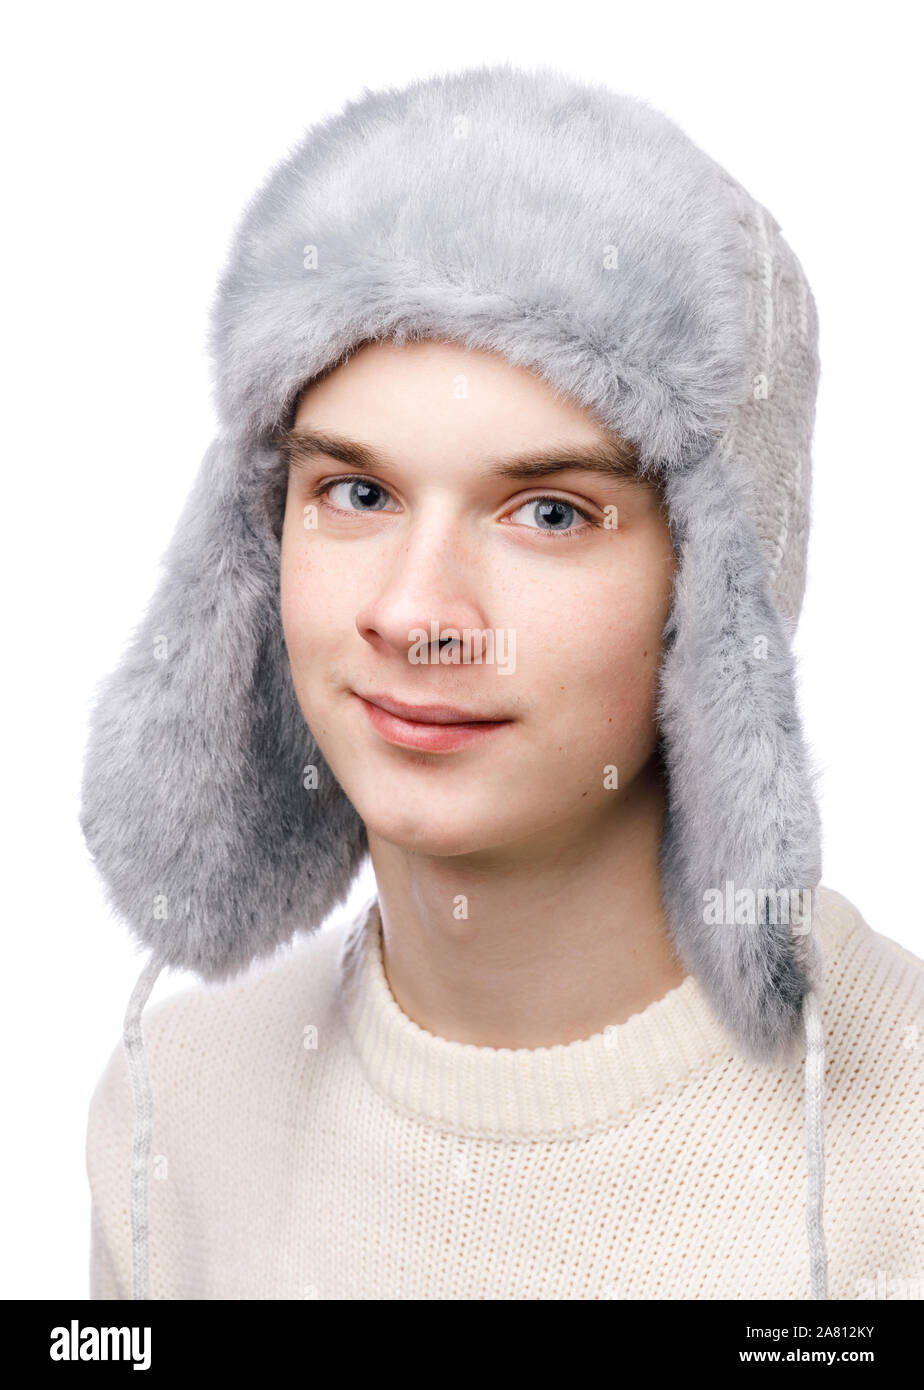 Head and shoulders studio portrait of smiling teenager boy wearing blue knitted faux fur winter trapper hat (Ushanka) and sweater on white background Stock Photo